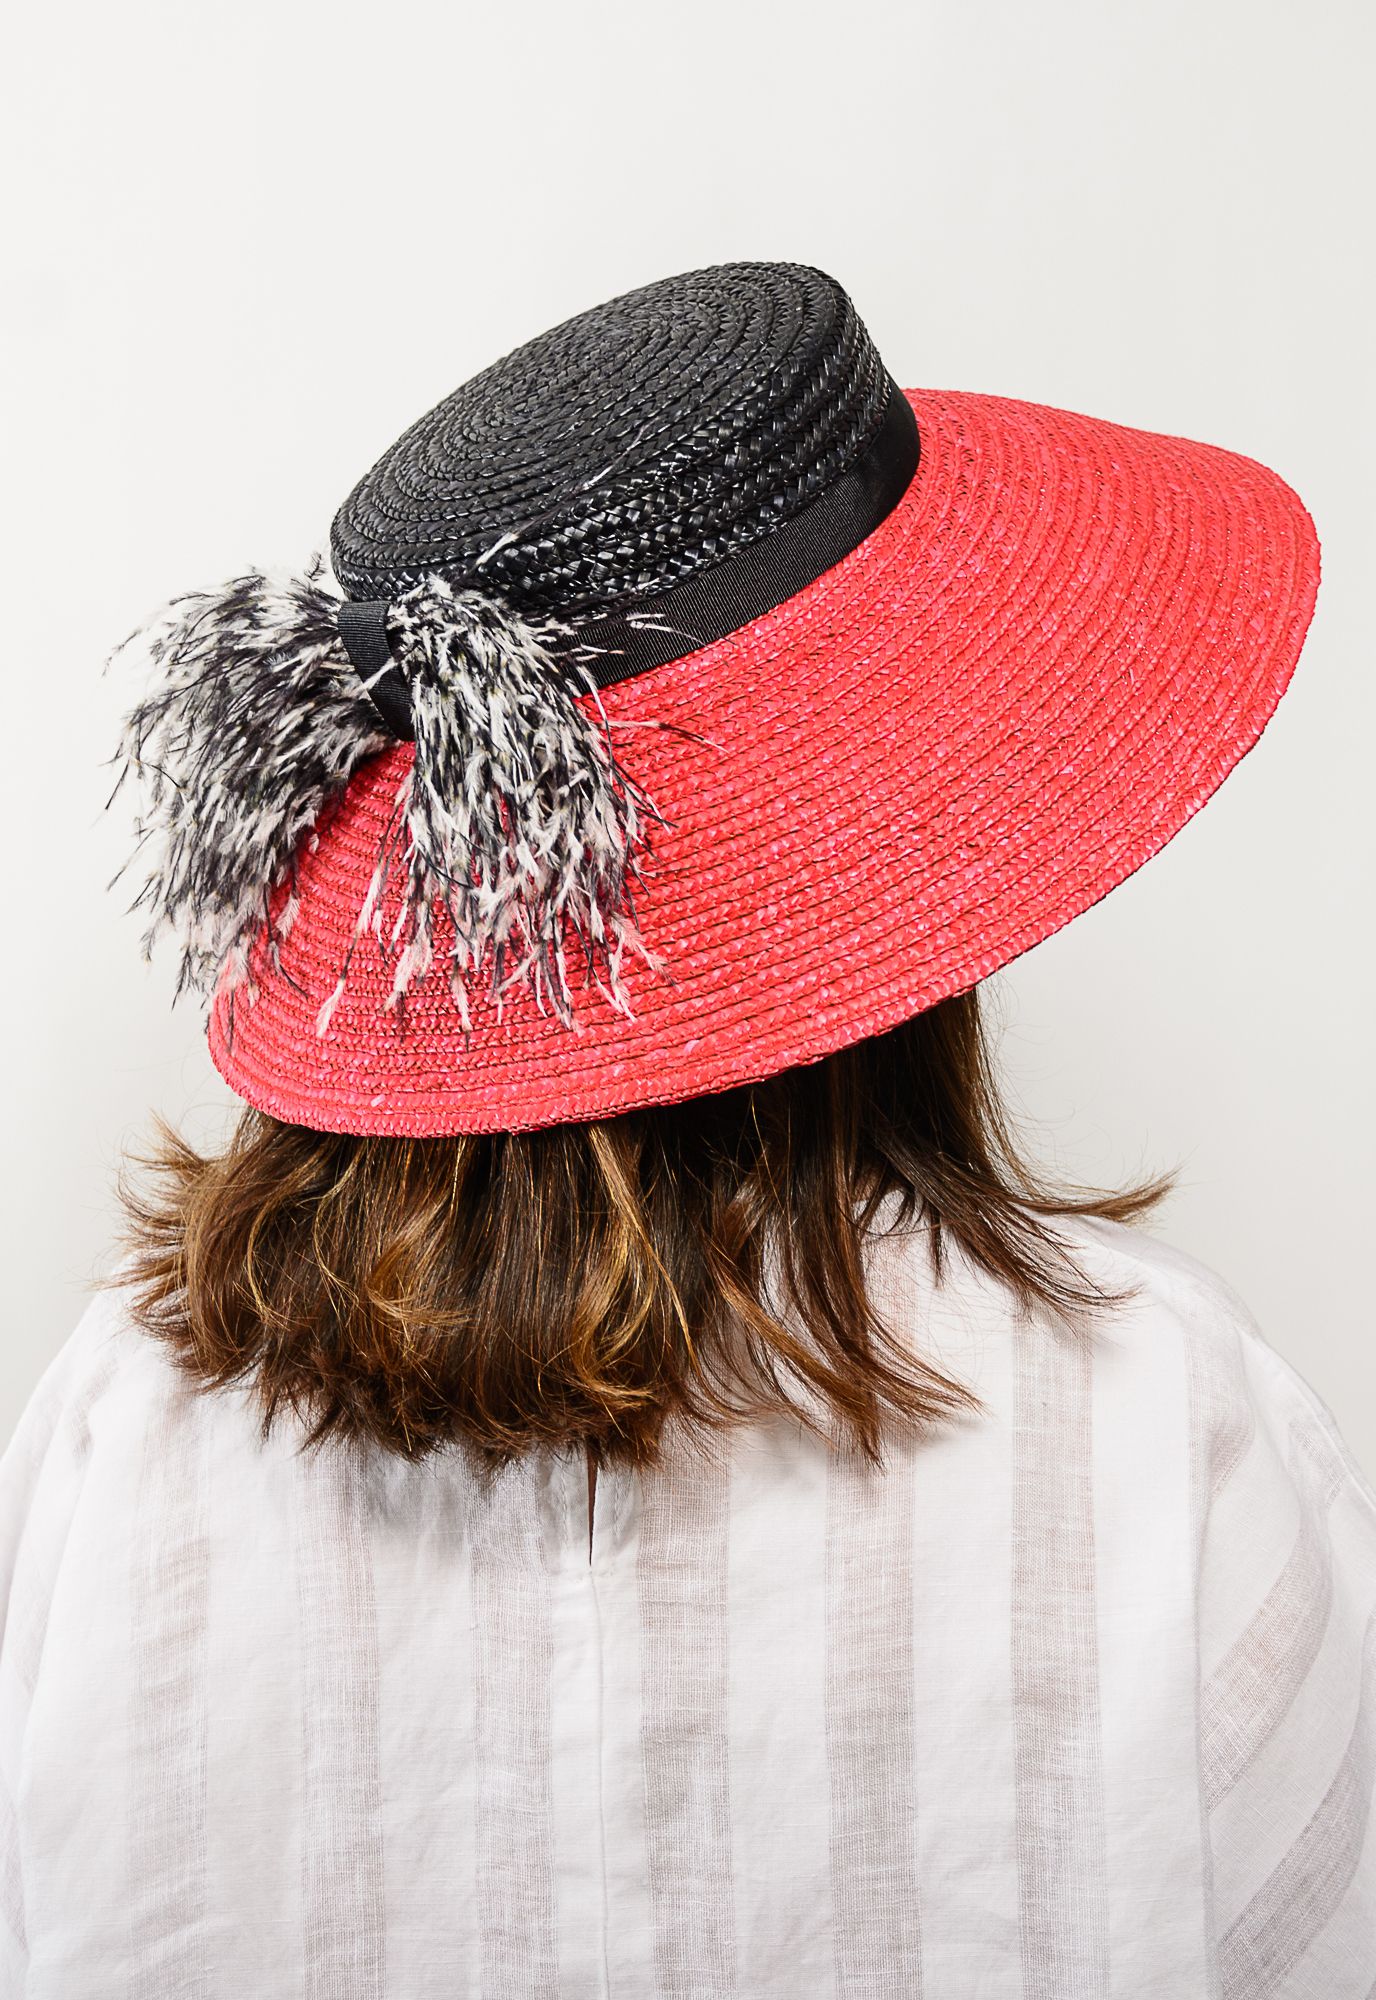 Hirta - Black and red straw boater hat, Red and black straw hat ...